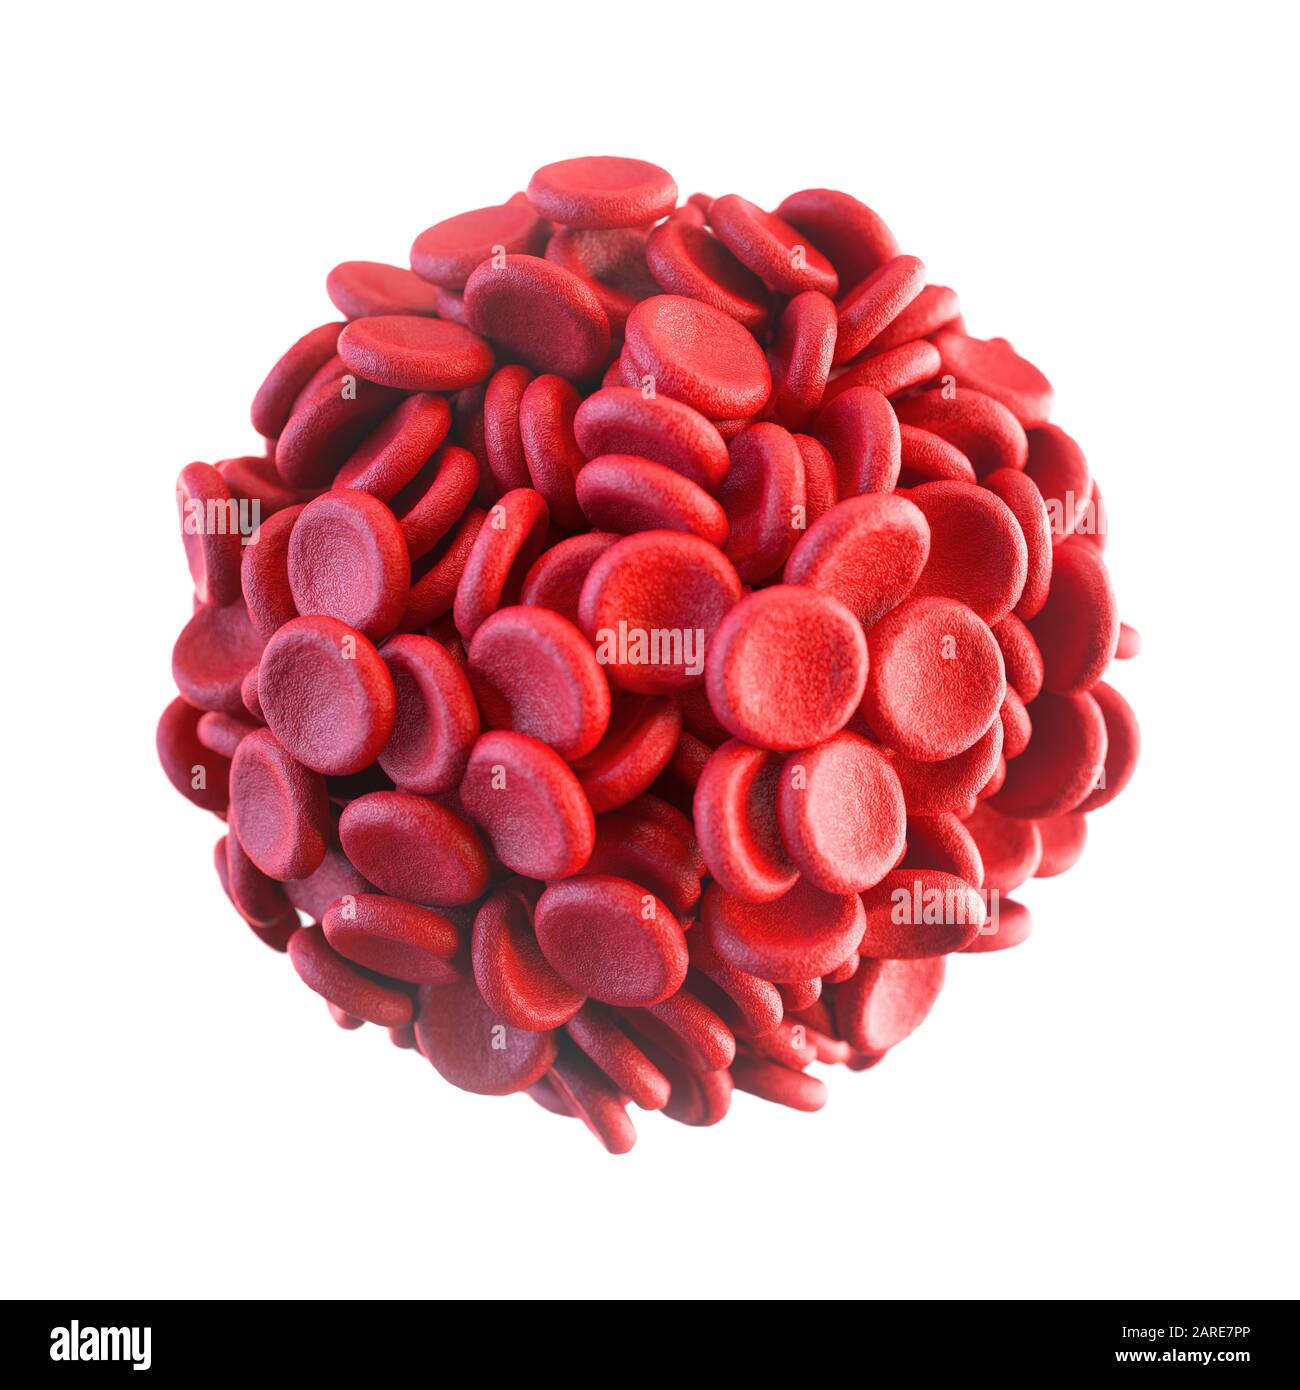 Red blood cells grouped on white background. 3D illustration, conceptual image. Stock Photo